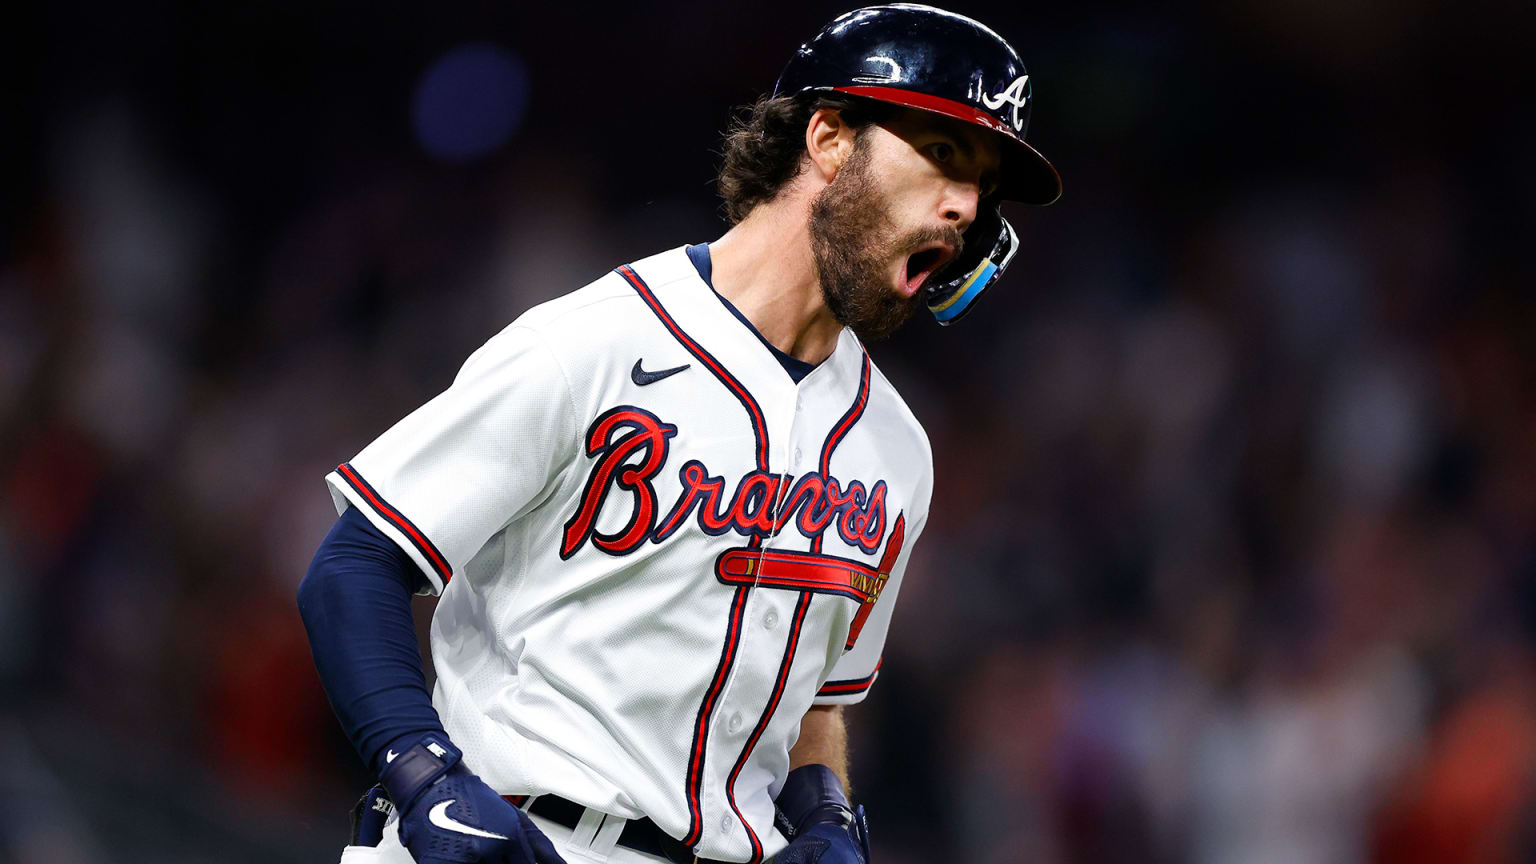 Dansby Swanson yells while rounding the bases